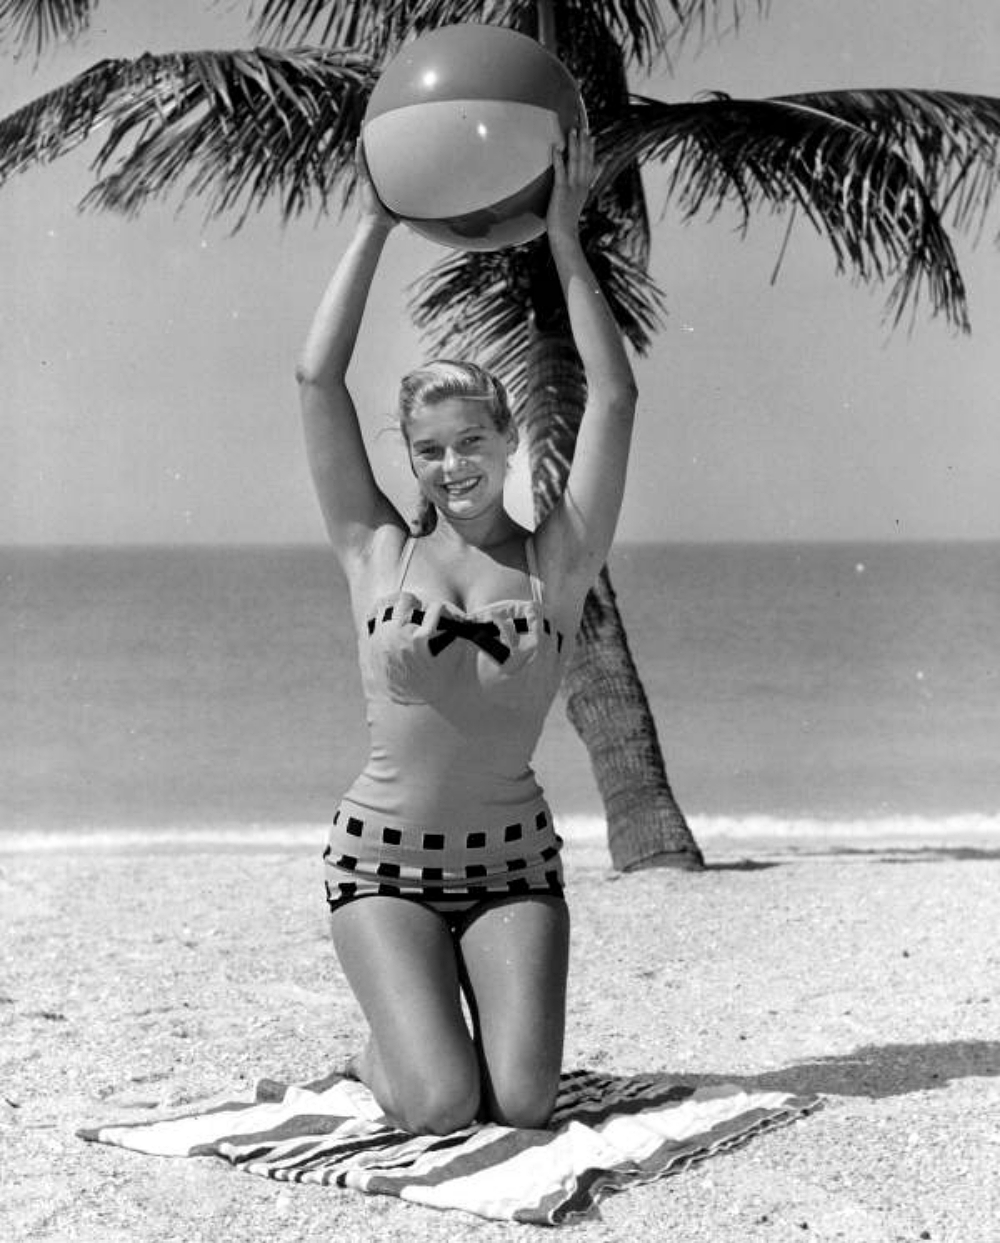 model holding up a beach ball on the beach in 1956